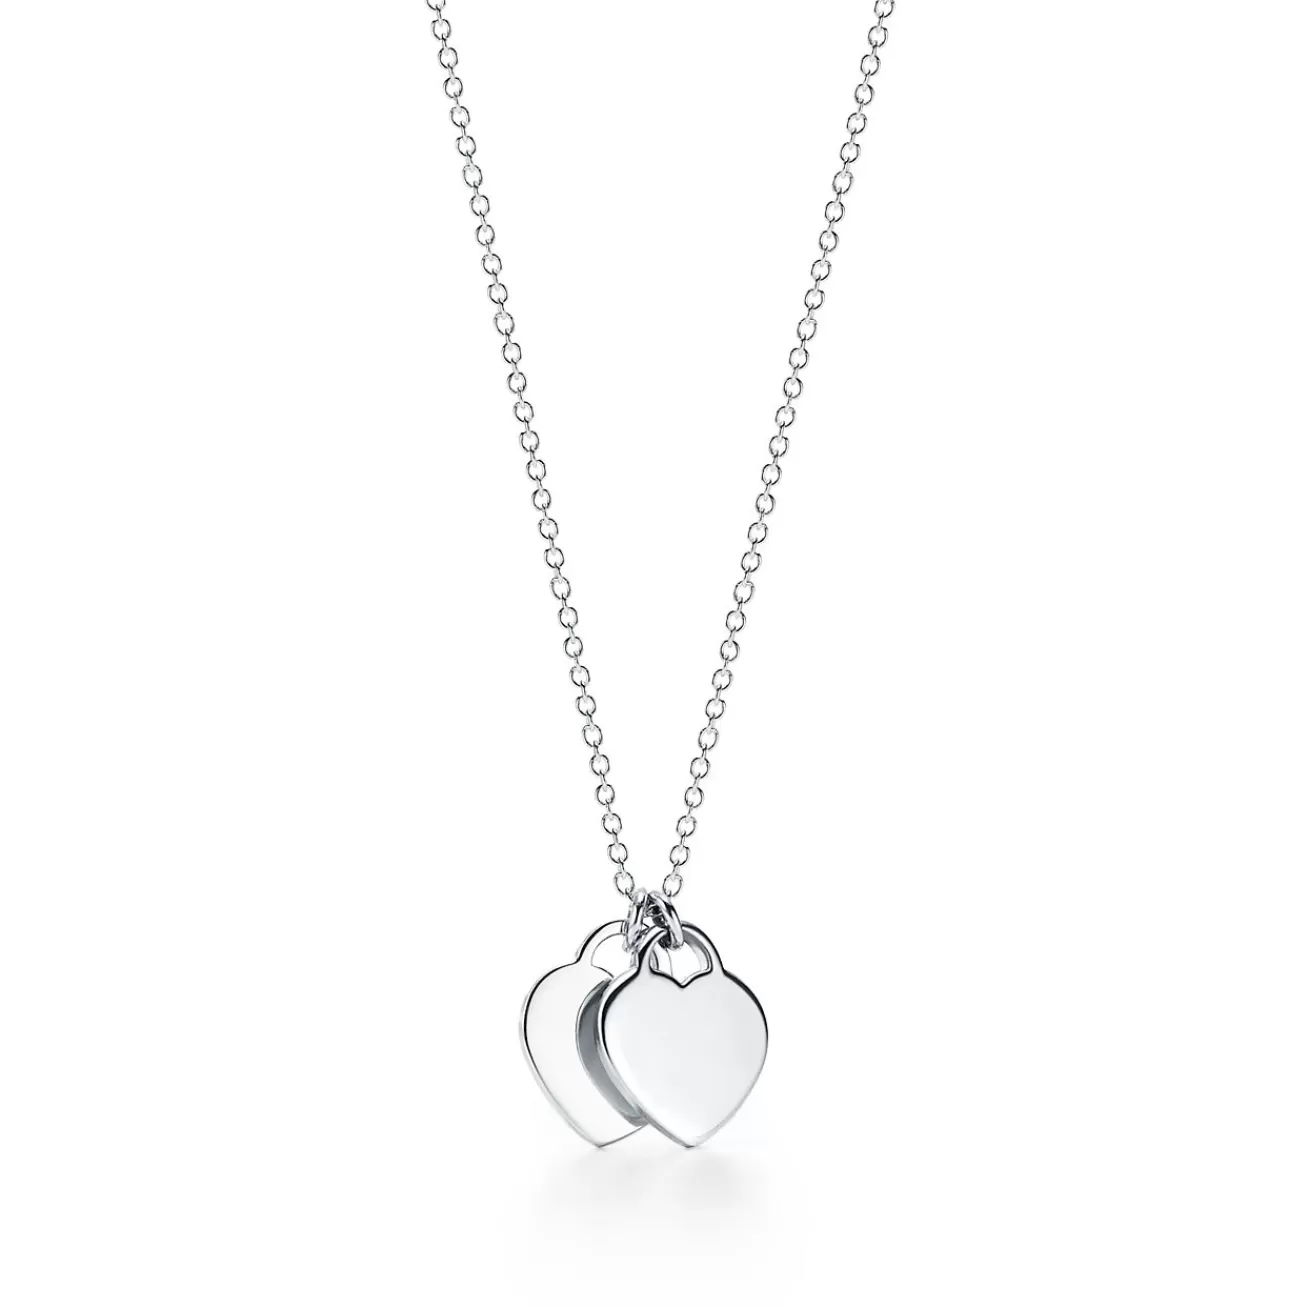 Tiffany & Co. Return to Tiffany® Red Double Heart Tag Pendant in Silver, Mini | ^ Necklaces & Pendants | Sterling Silver Jewelry